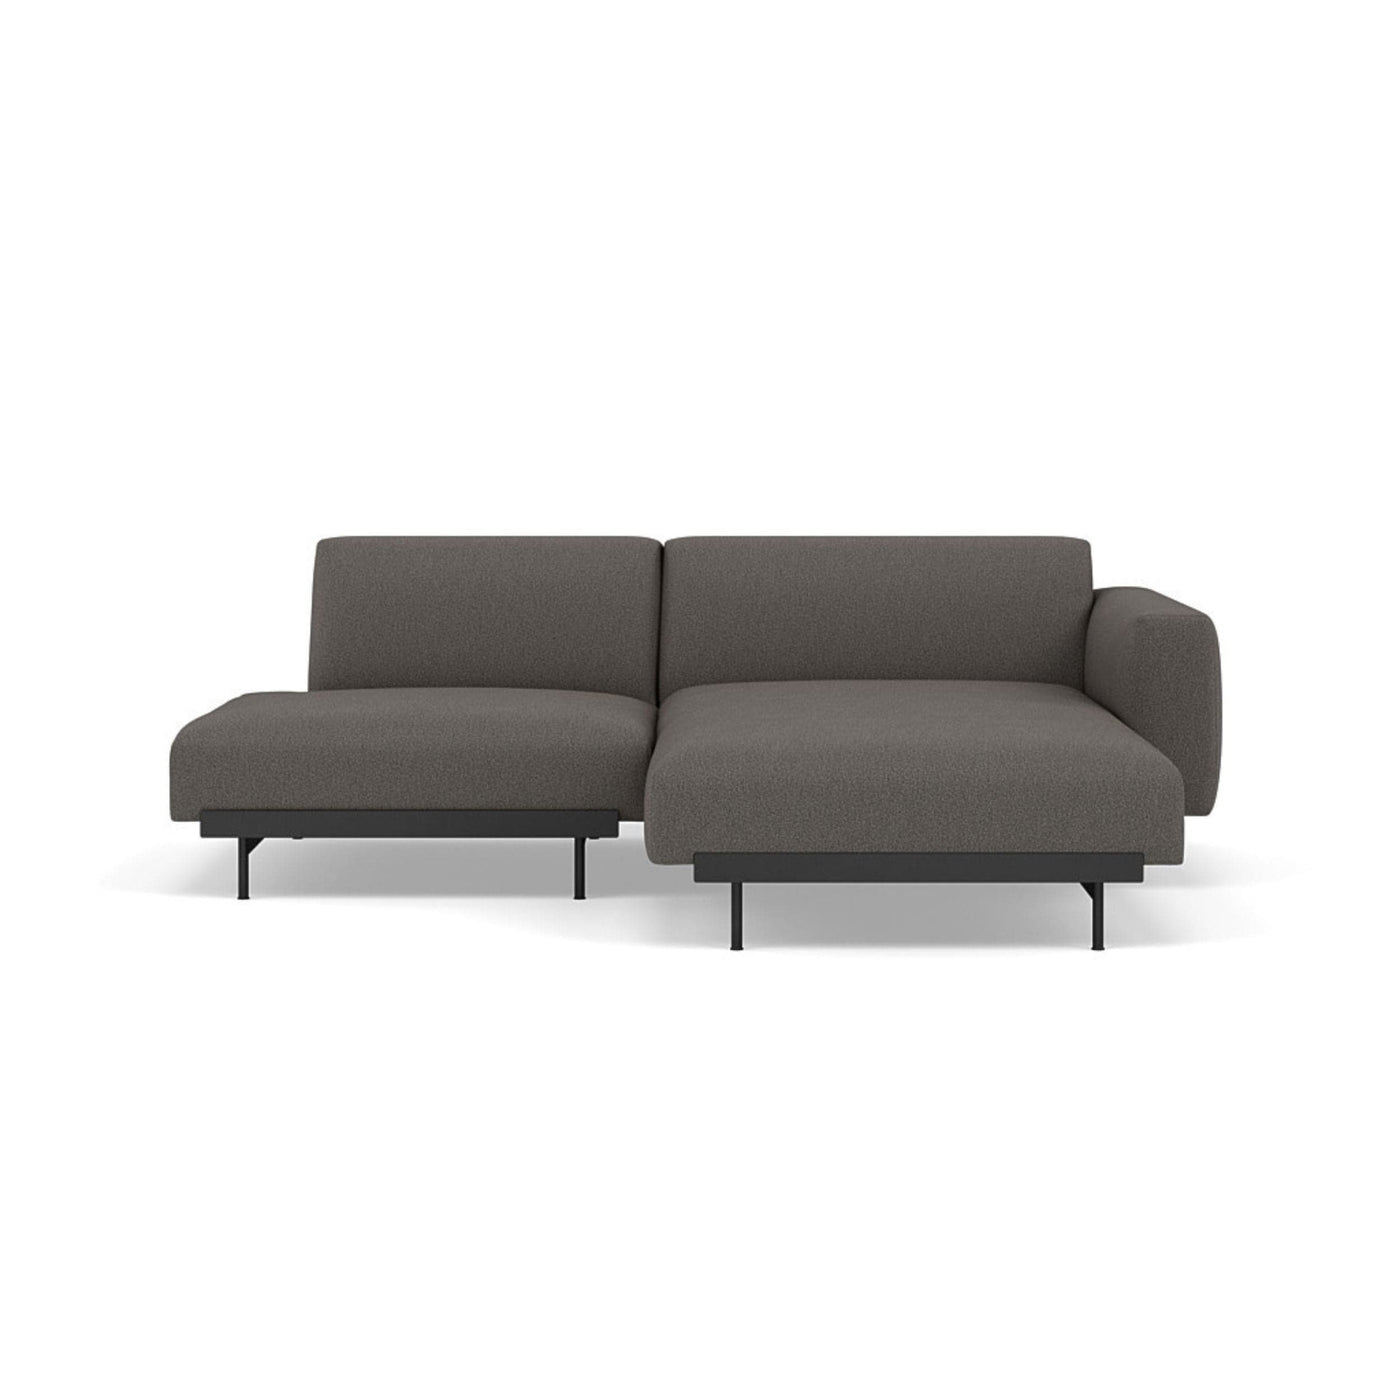 Muuto In Situ Modular 2 Seater Sofa, configuration 7 in clay 1 fabric. Made to order from someday designs #colour_clay-9